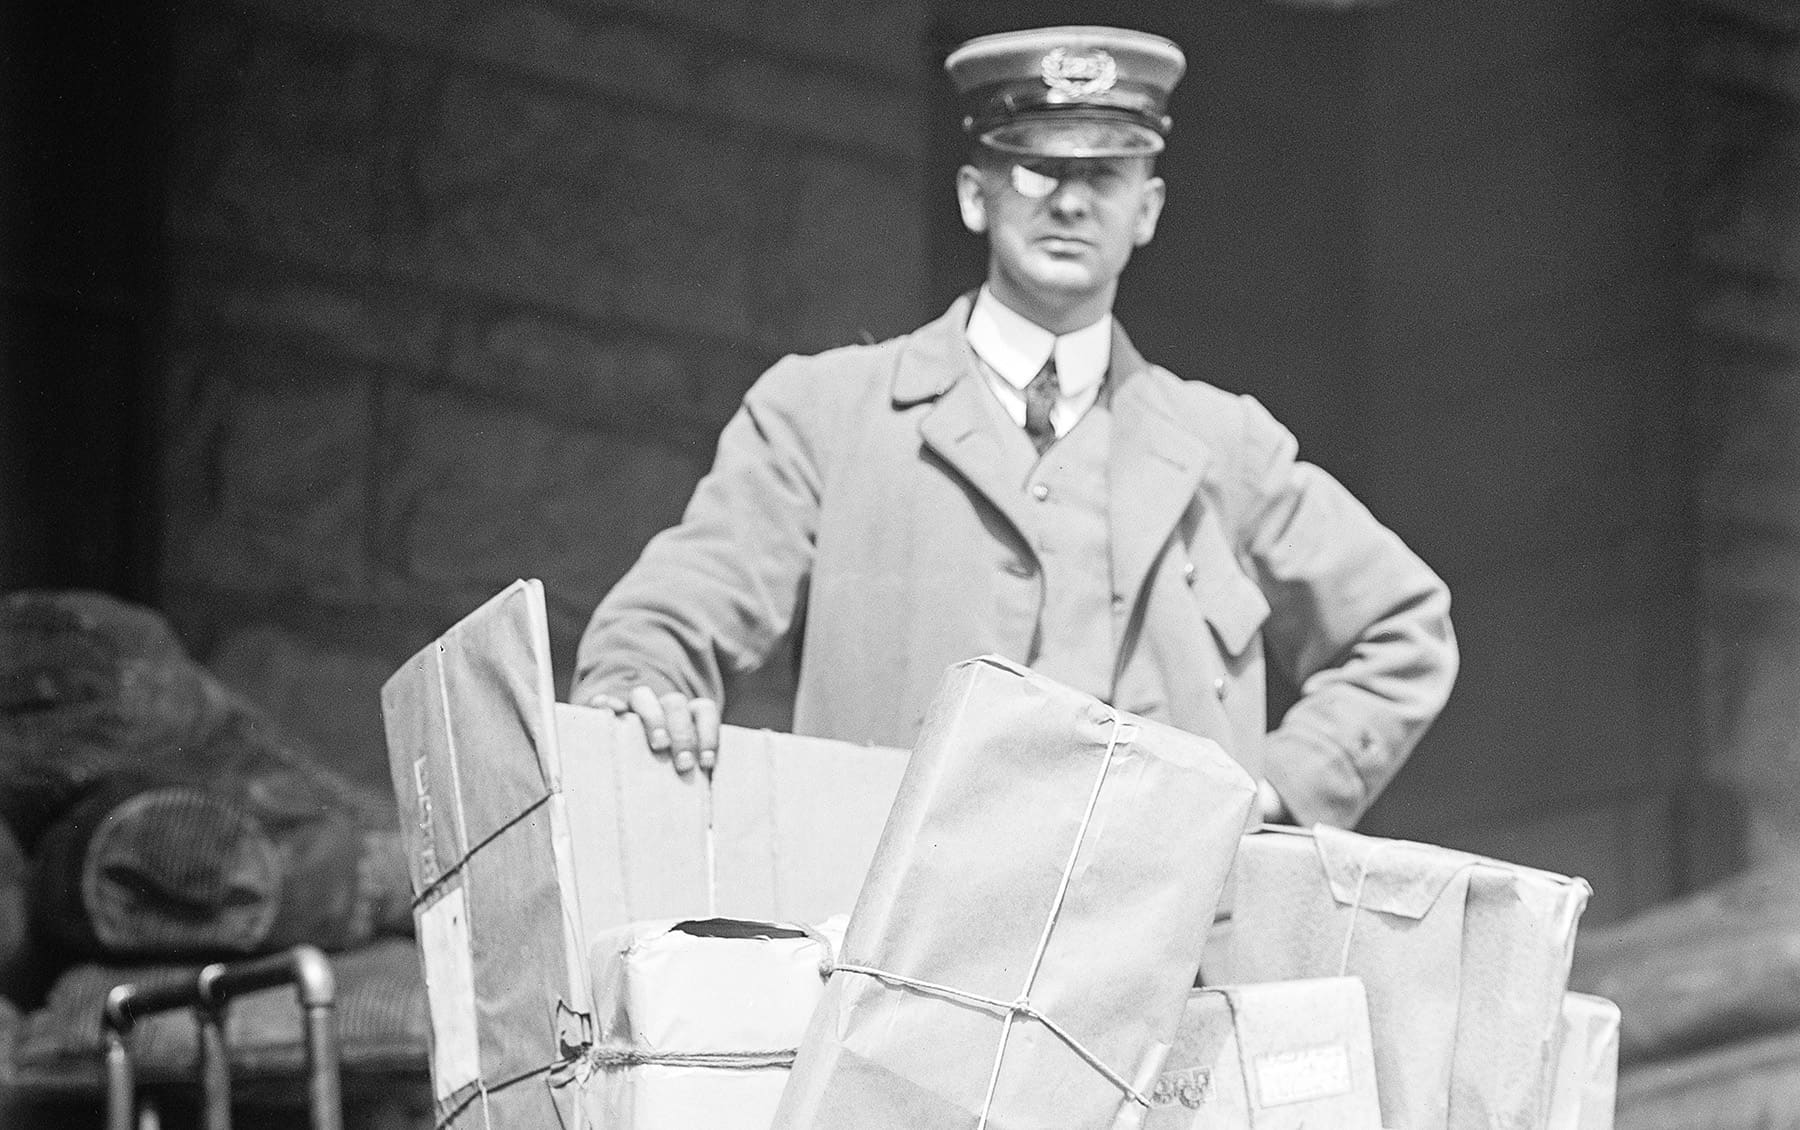 Postal worker standing behind a large wire basket of packages